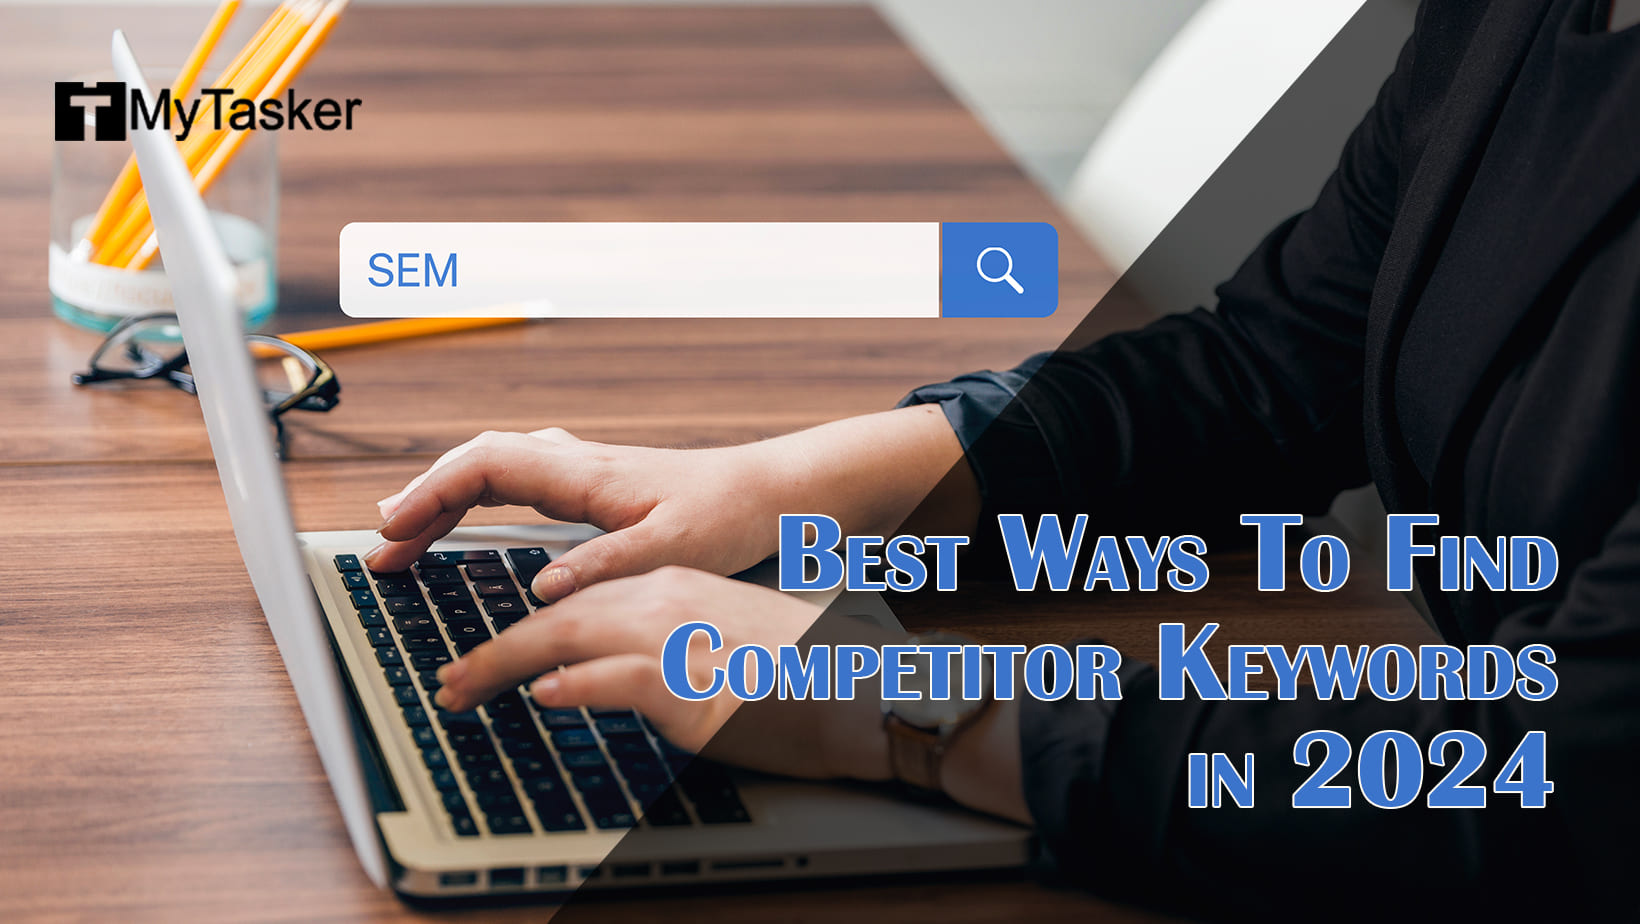 Best Ways To Find Competitor Keywords in 2024